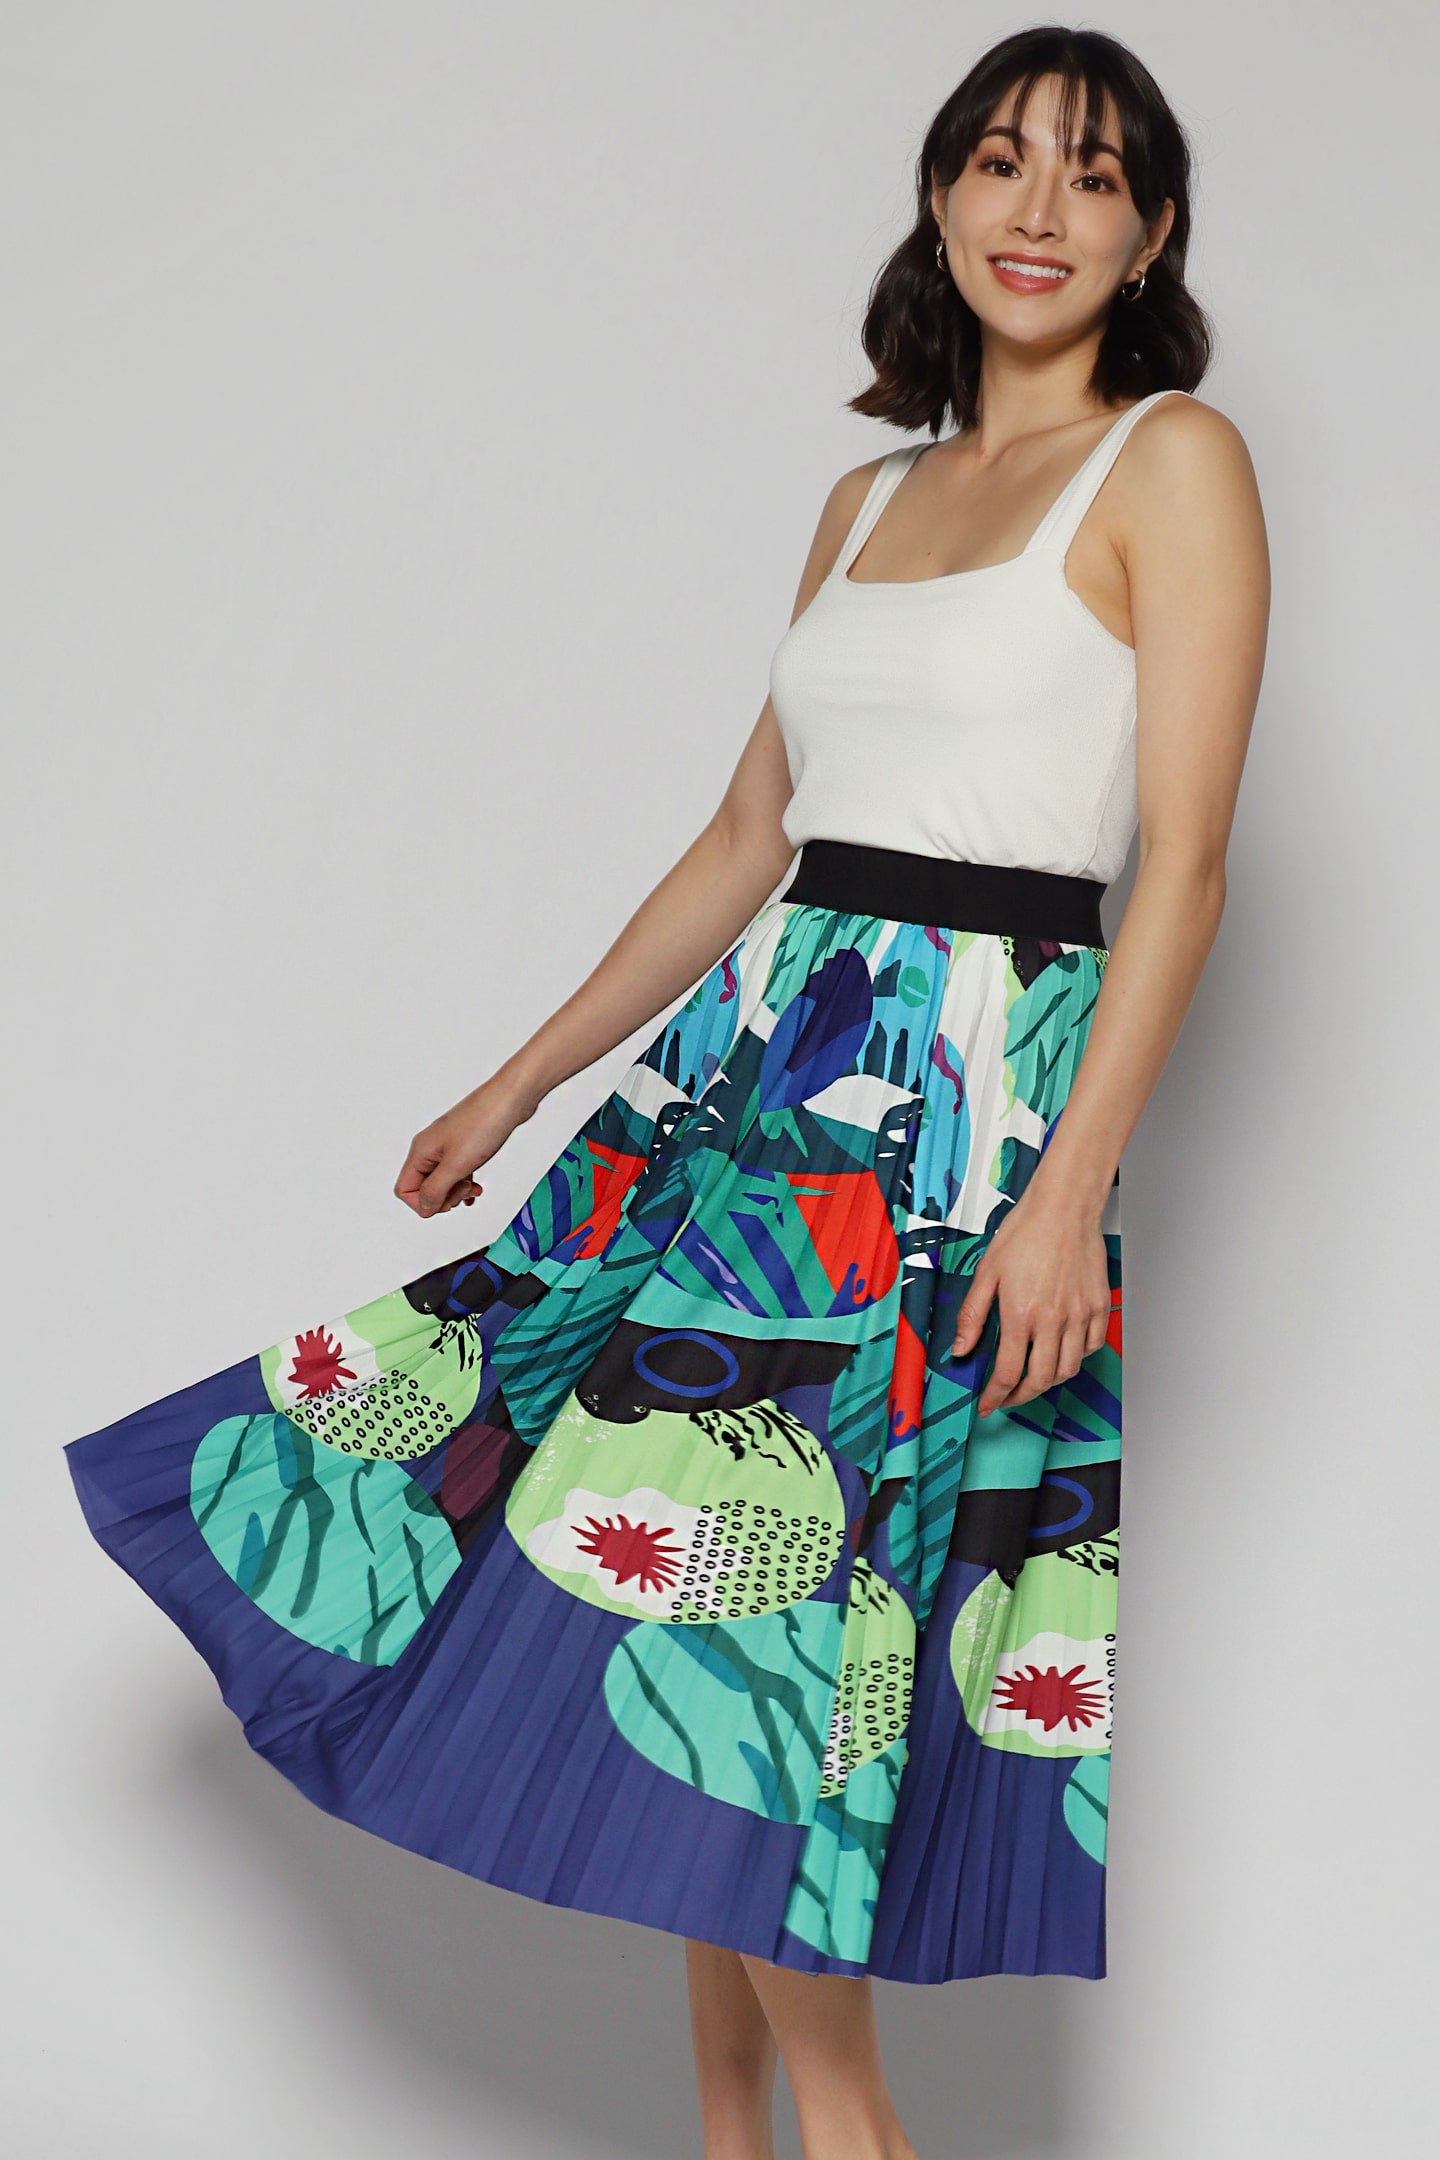 Elise Skirt in Holiday